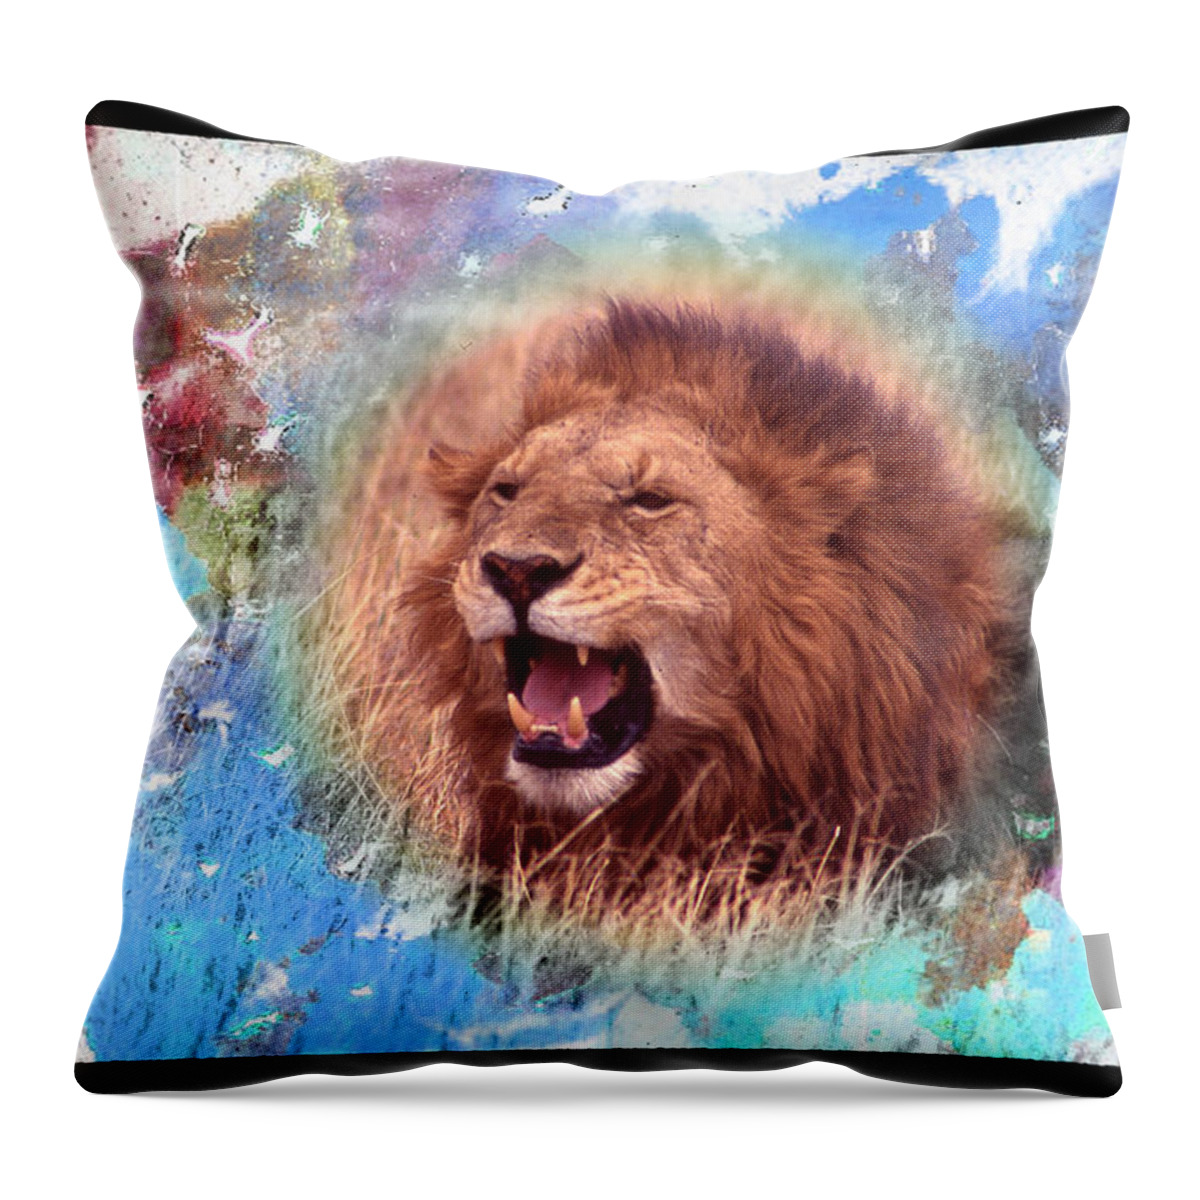 Lion Throw Pillow featuring the digital art Lion Roaring by Russel Considine